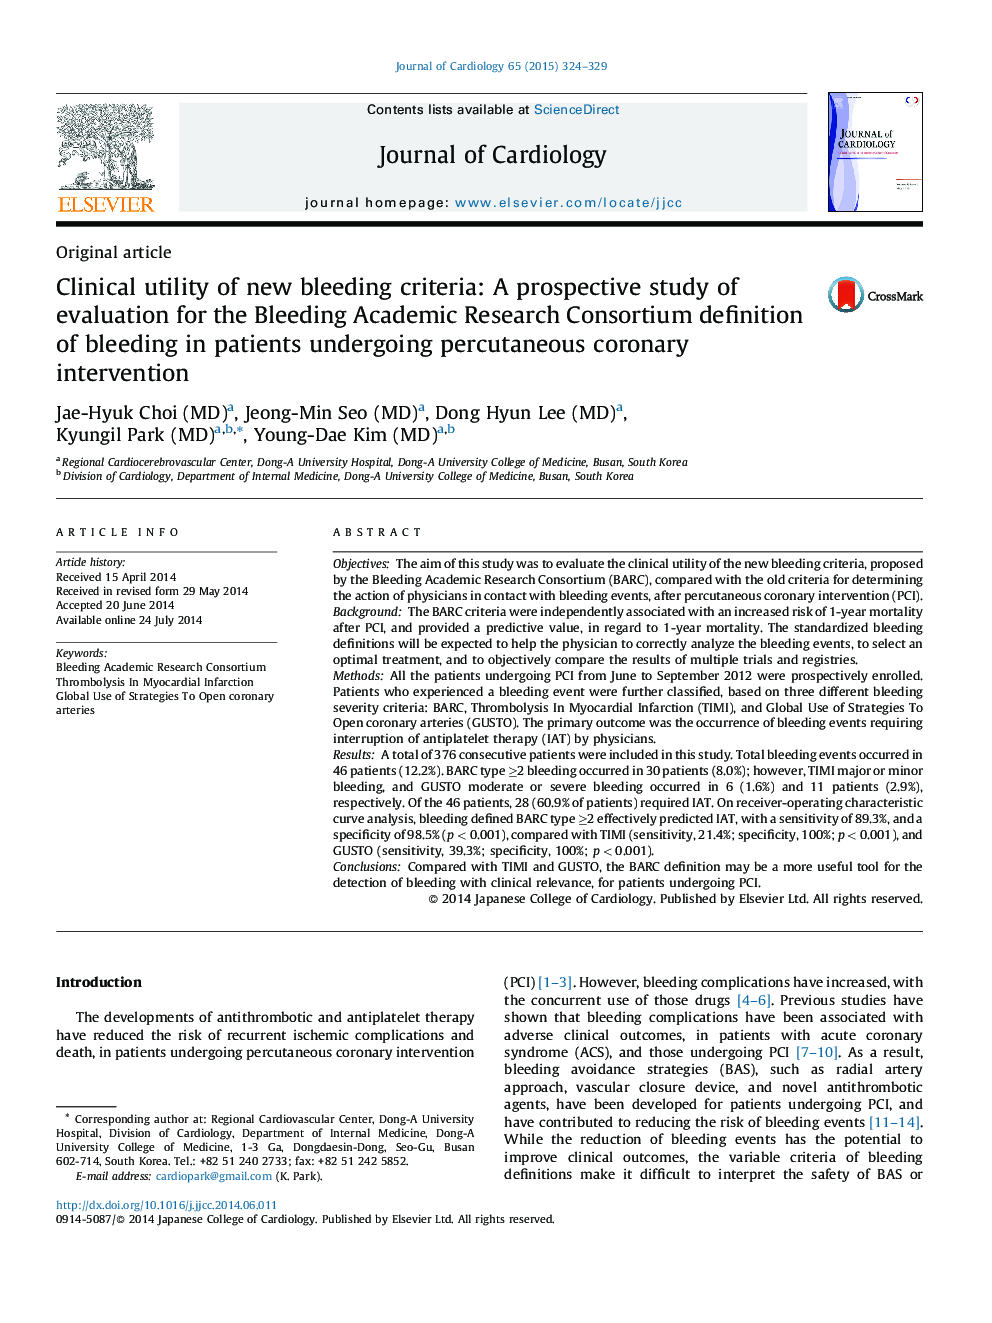 Clinical utility of new bleeding criteria: A prospective study of evaluation for the Bleeding Academic Research Consortium definition of bleeding in patients undergoing percutaneous coronary intervention